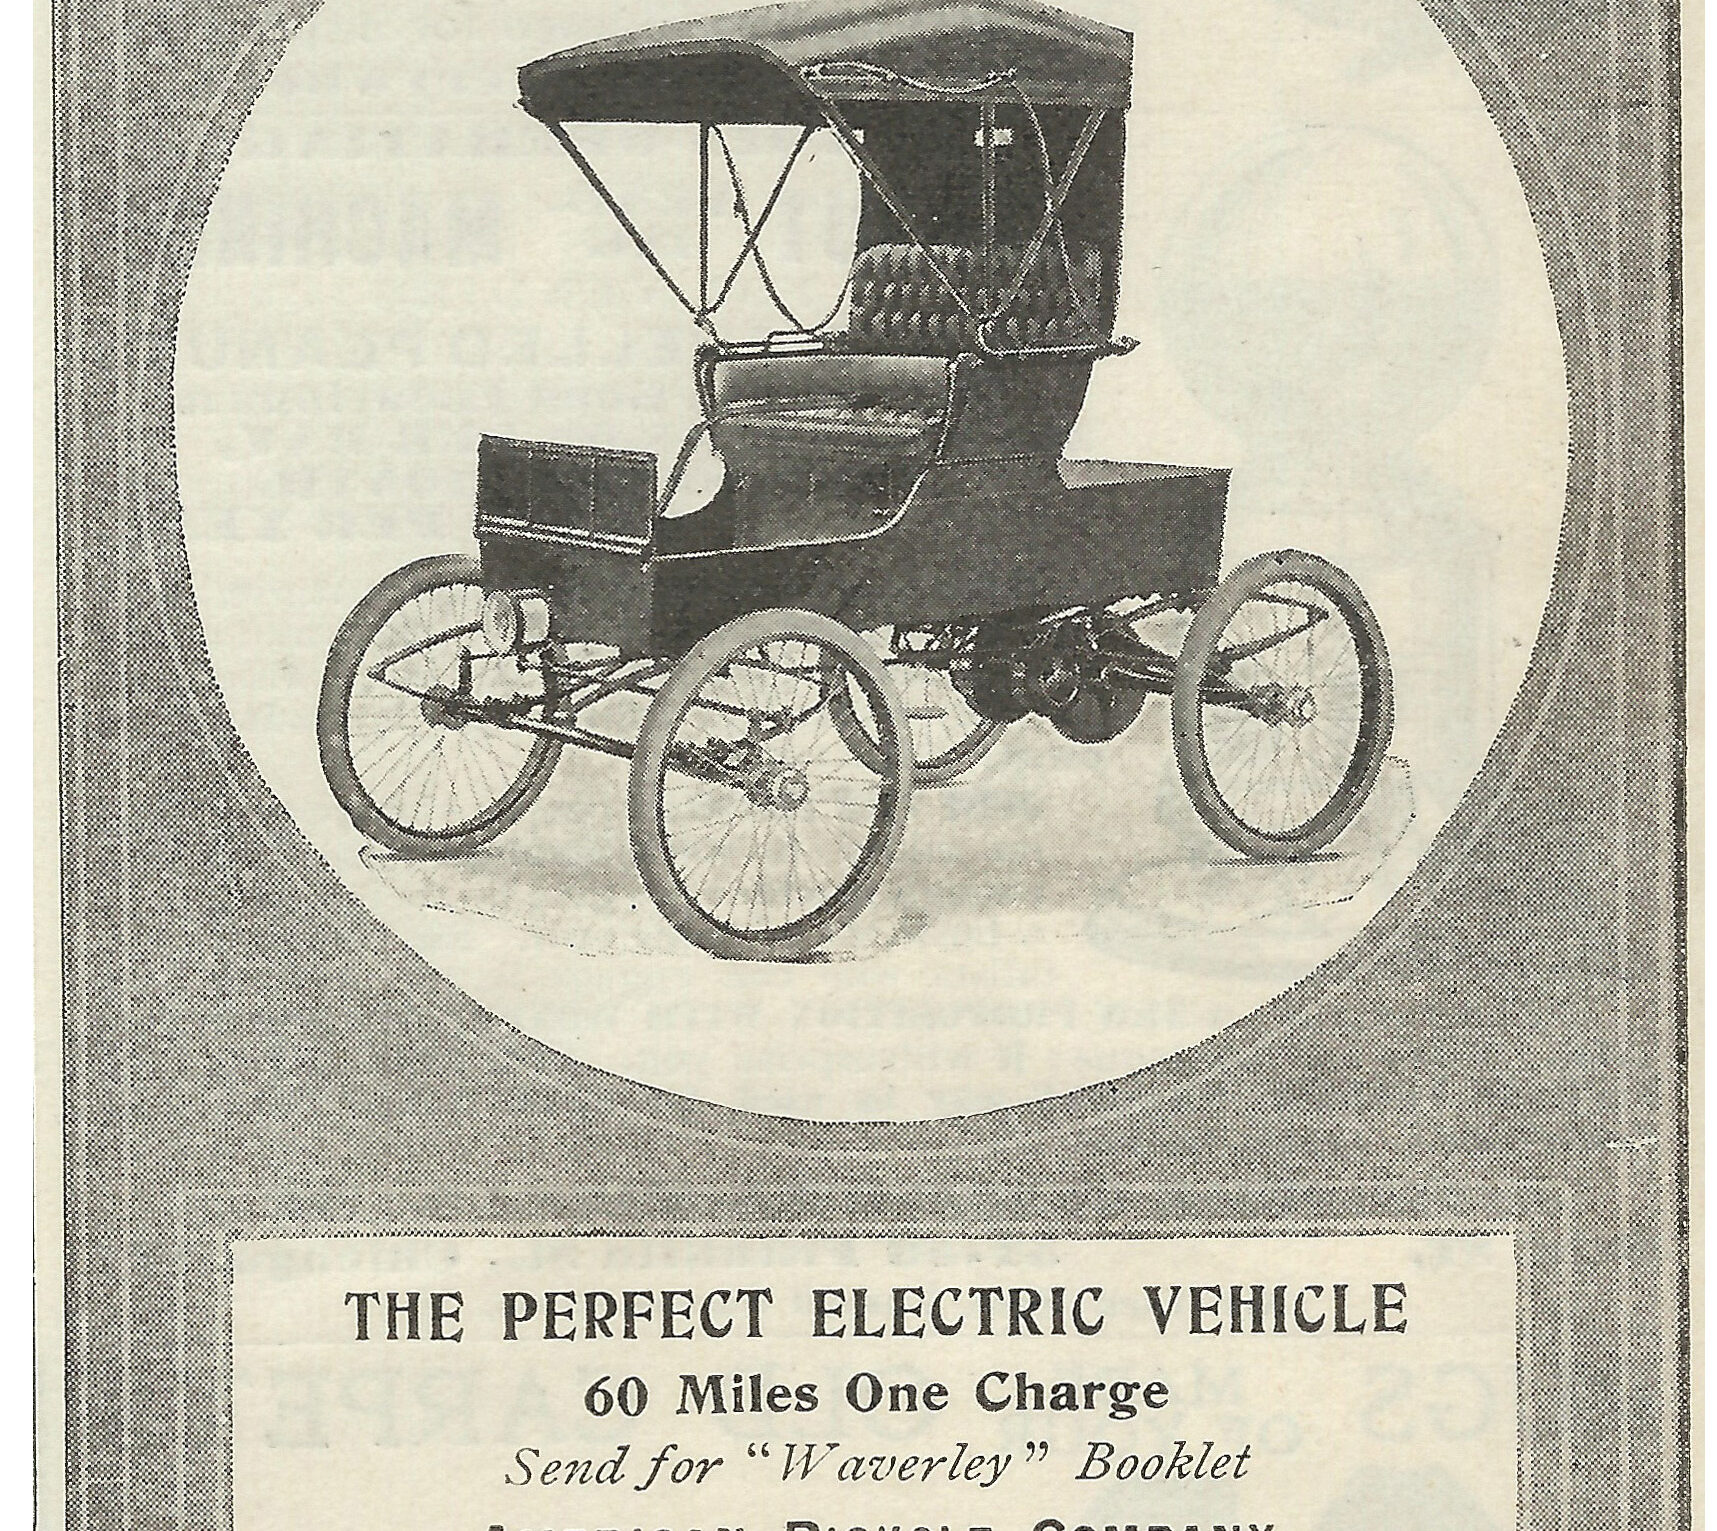 Newspaper clipping from 1901, picturing the Waverley Electric and descibing it as "The Perfect Electric Vehicle"